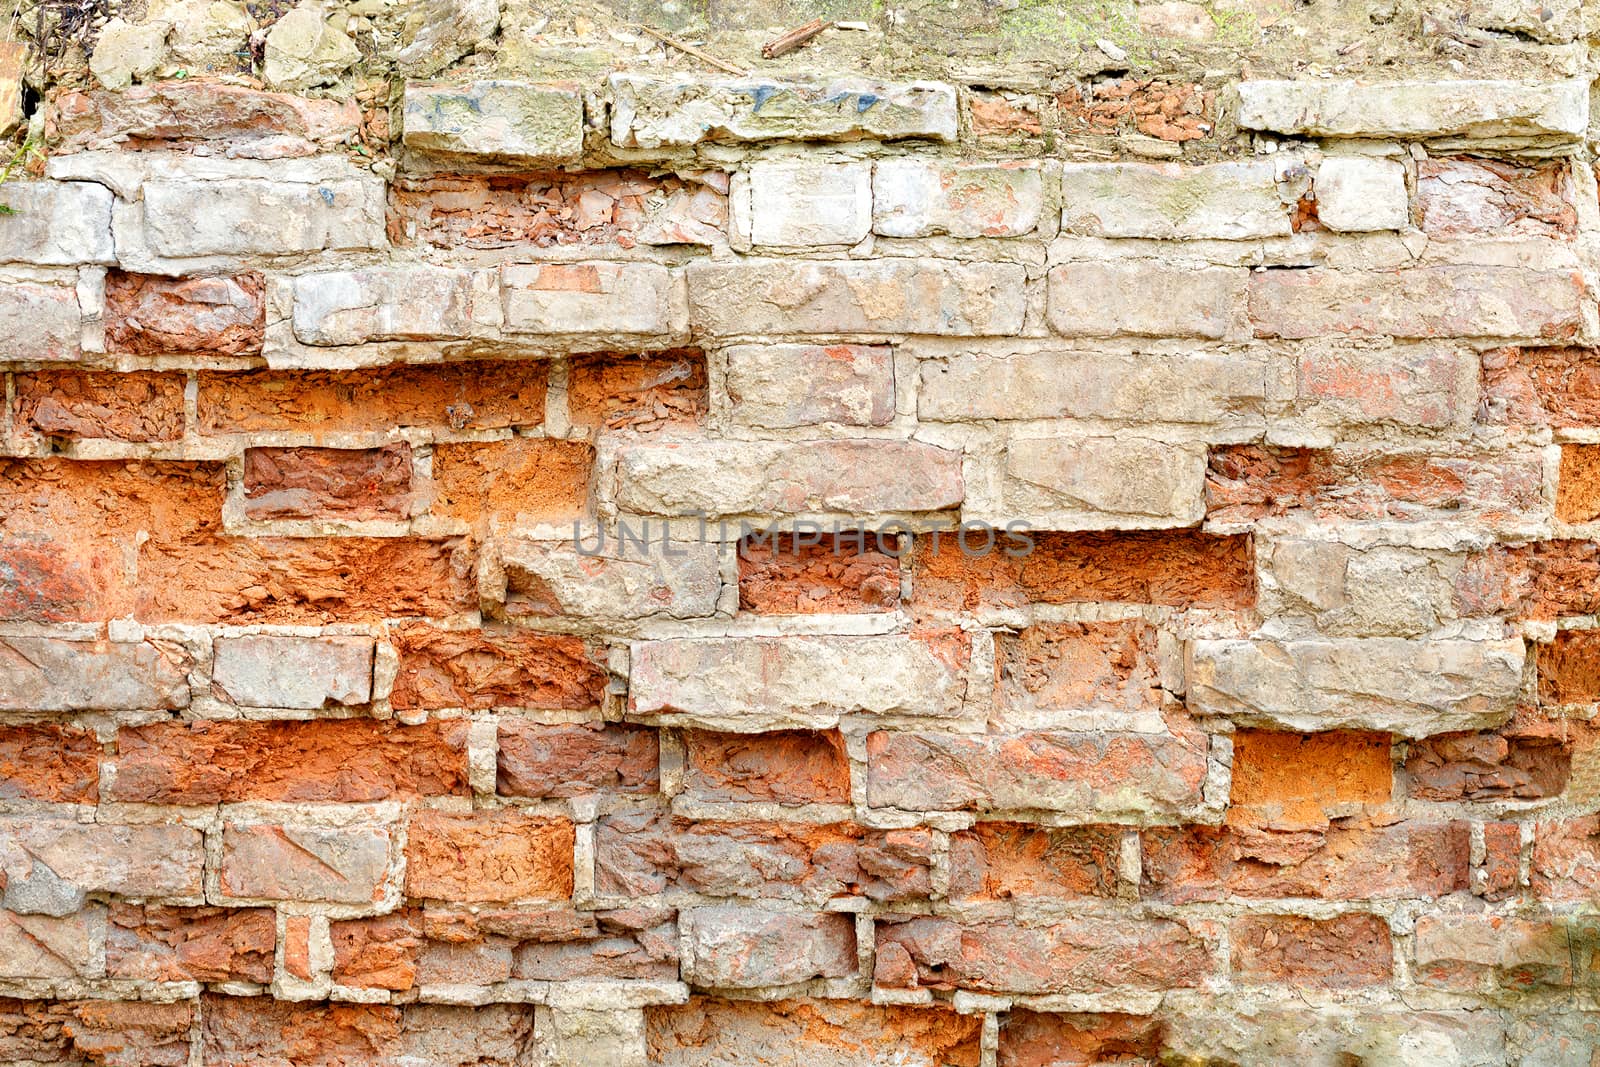 Old ruined red brick wall with cracked and broken bricks. Background texture of debris and piece of brickwork.